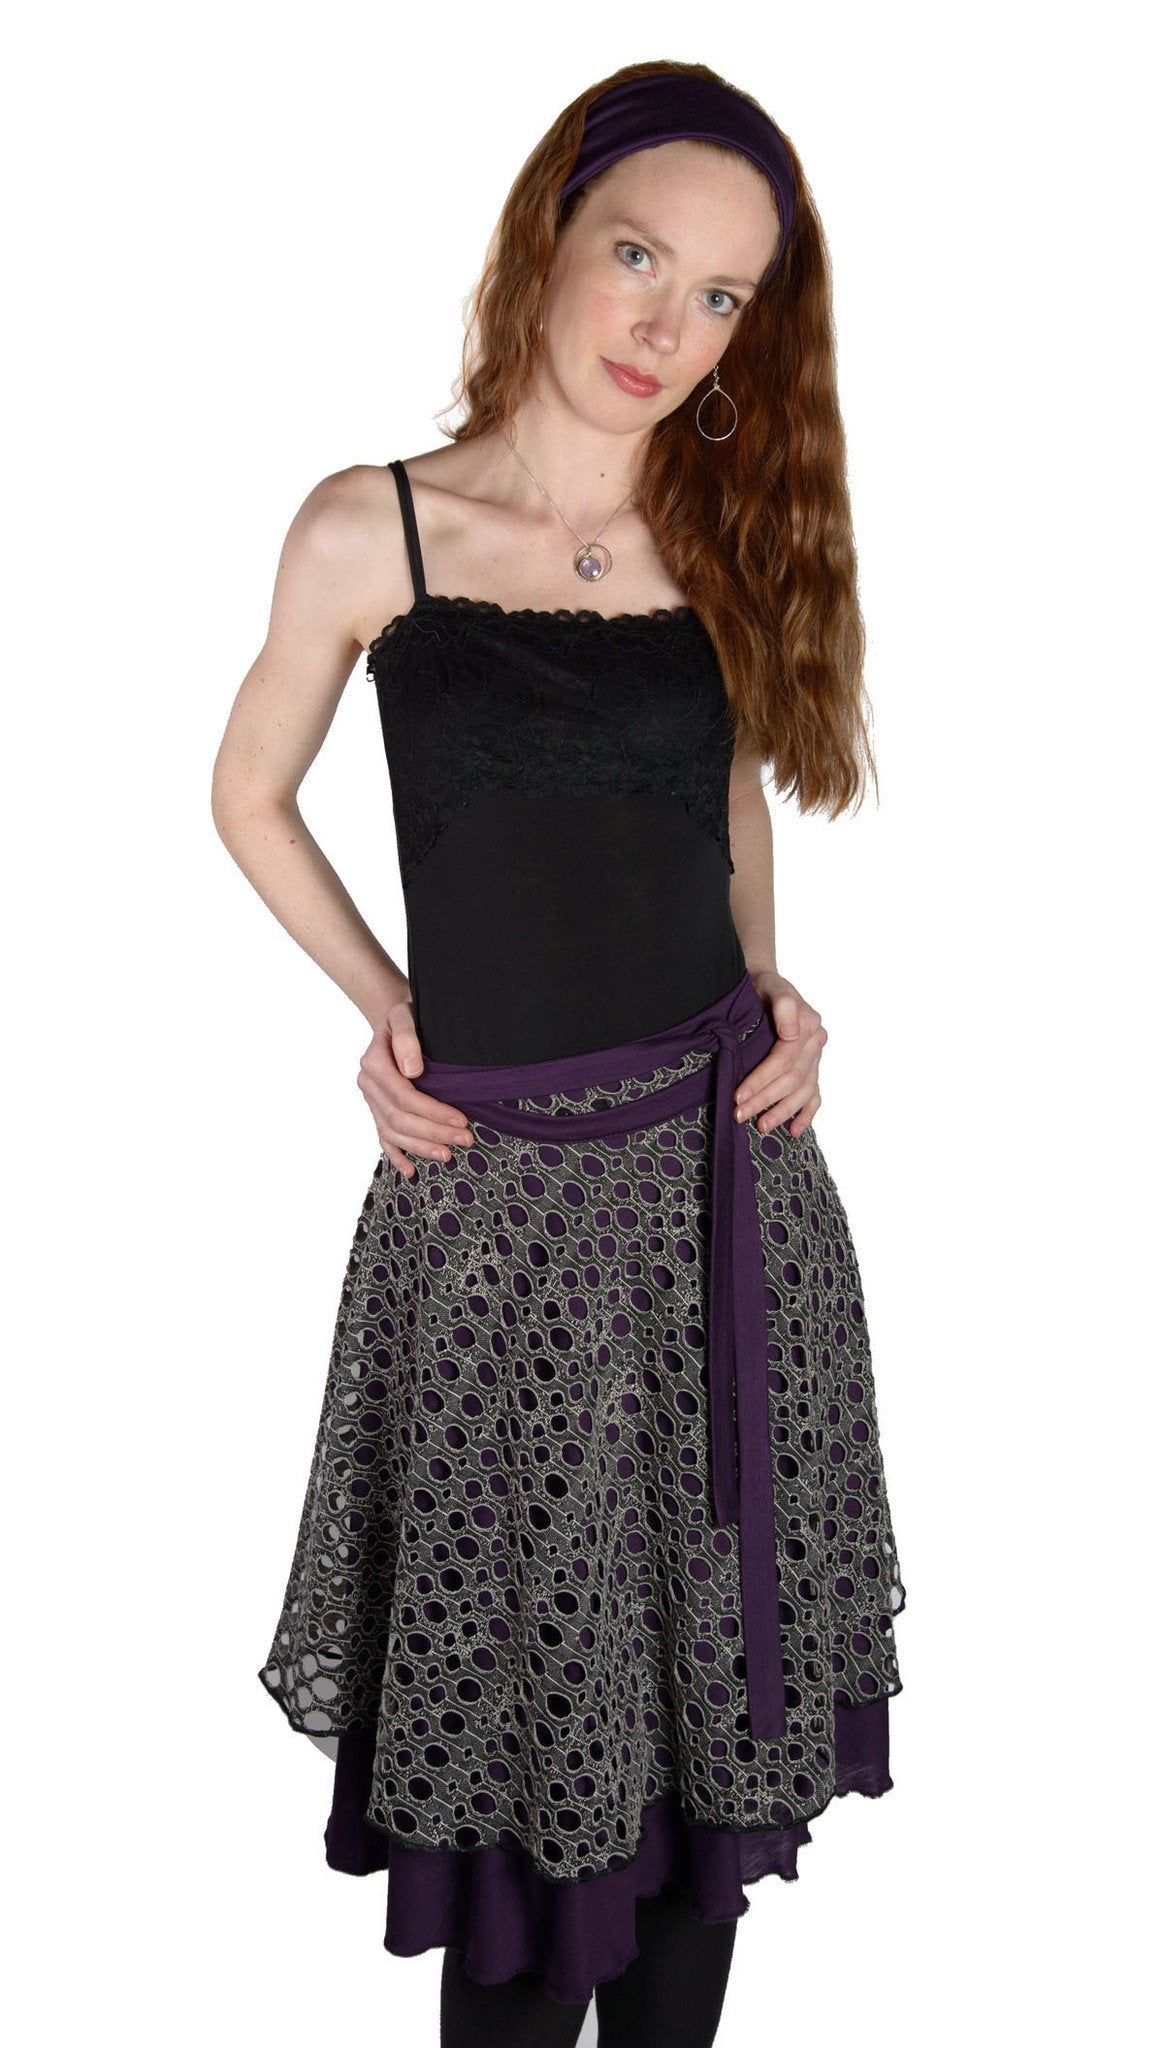 Model wearing Multi-Wrap as a Skirt | Lunar Eclipse with Jersey Knit Abyss |  Handmade by Pandemonium Millinery | Seattle WA USA